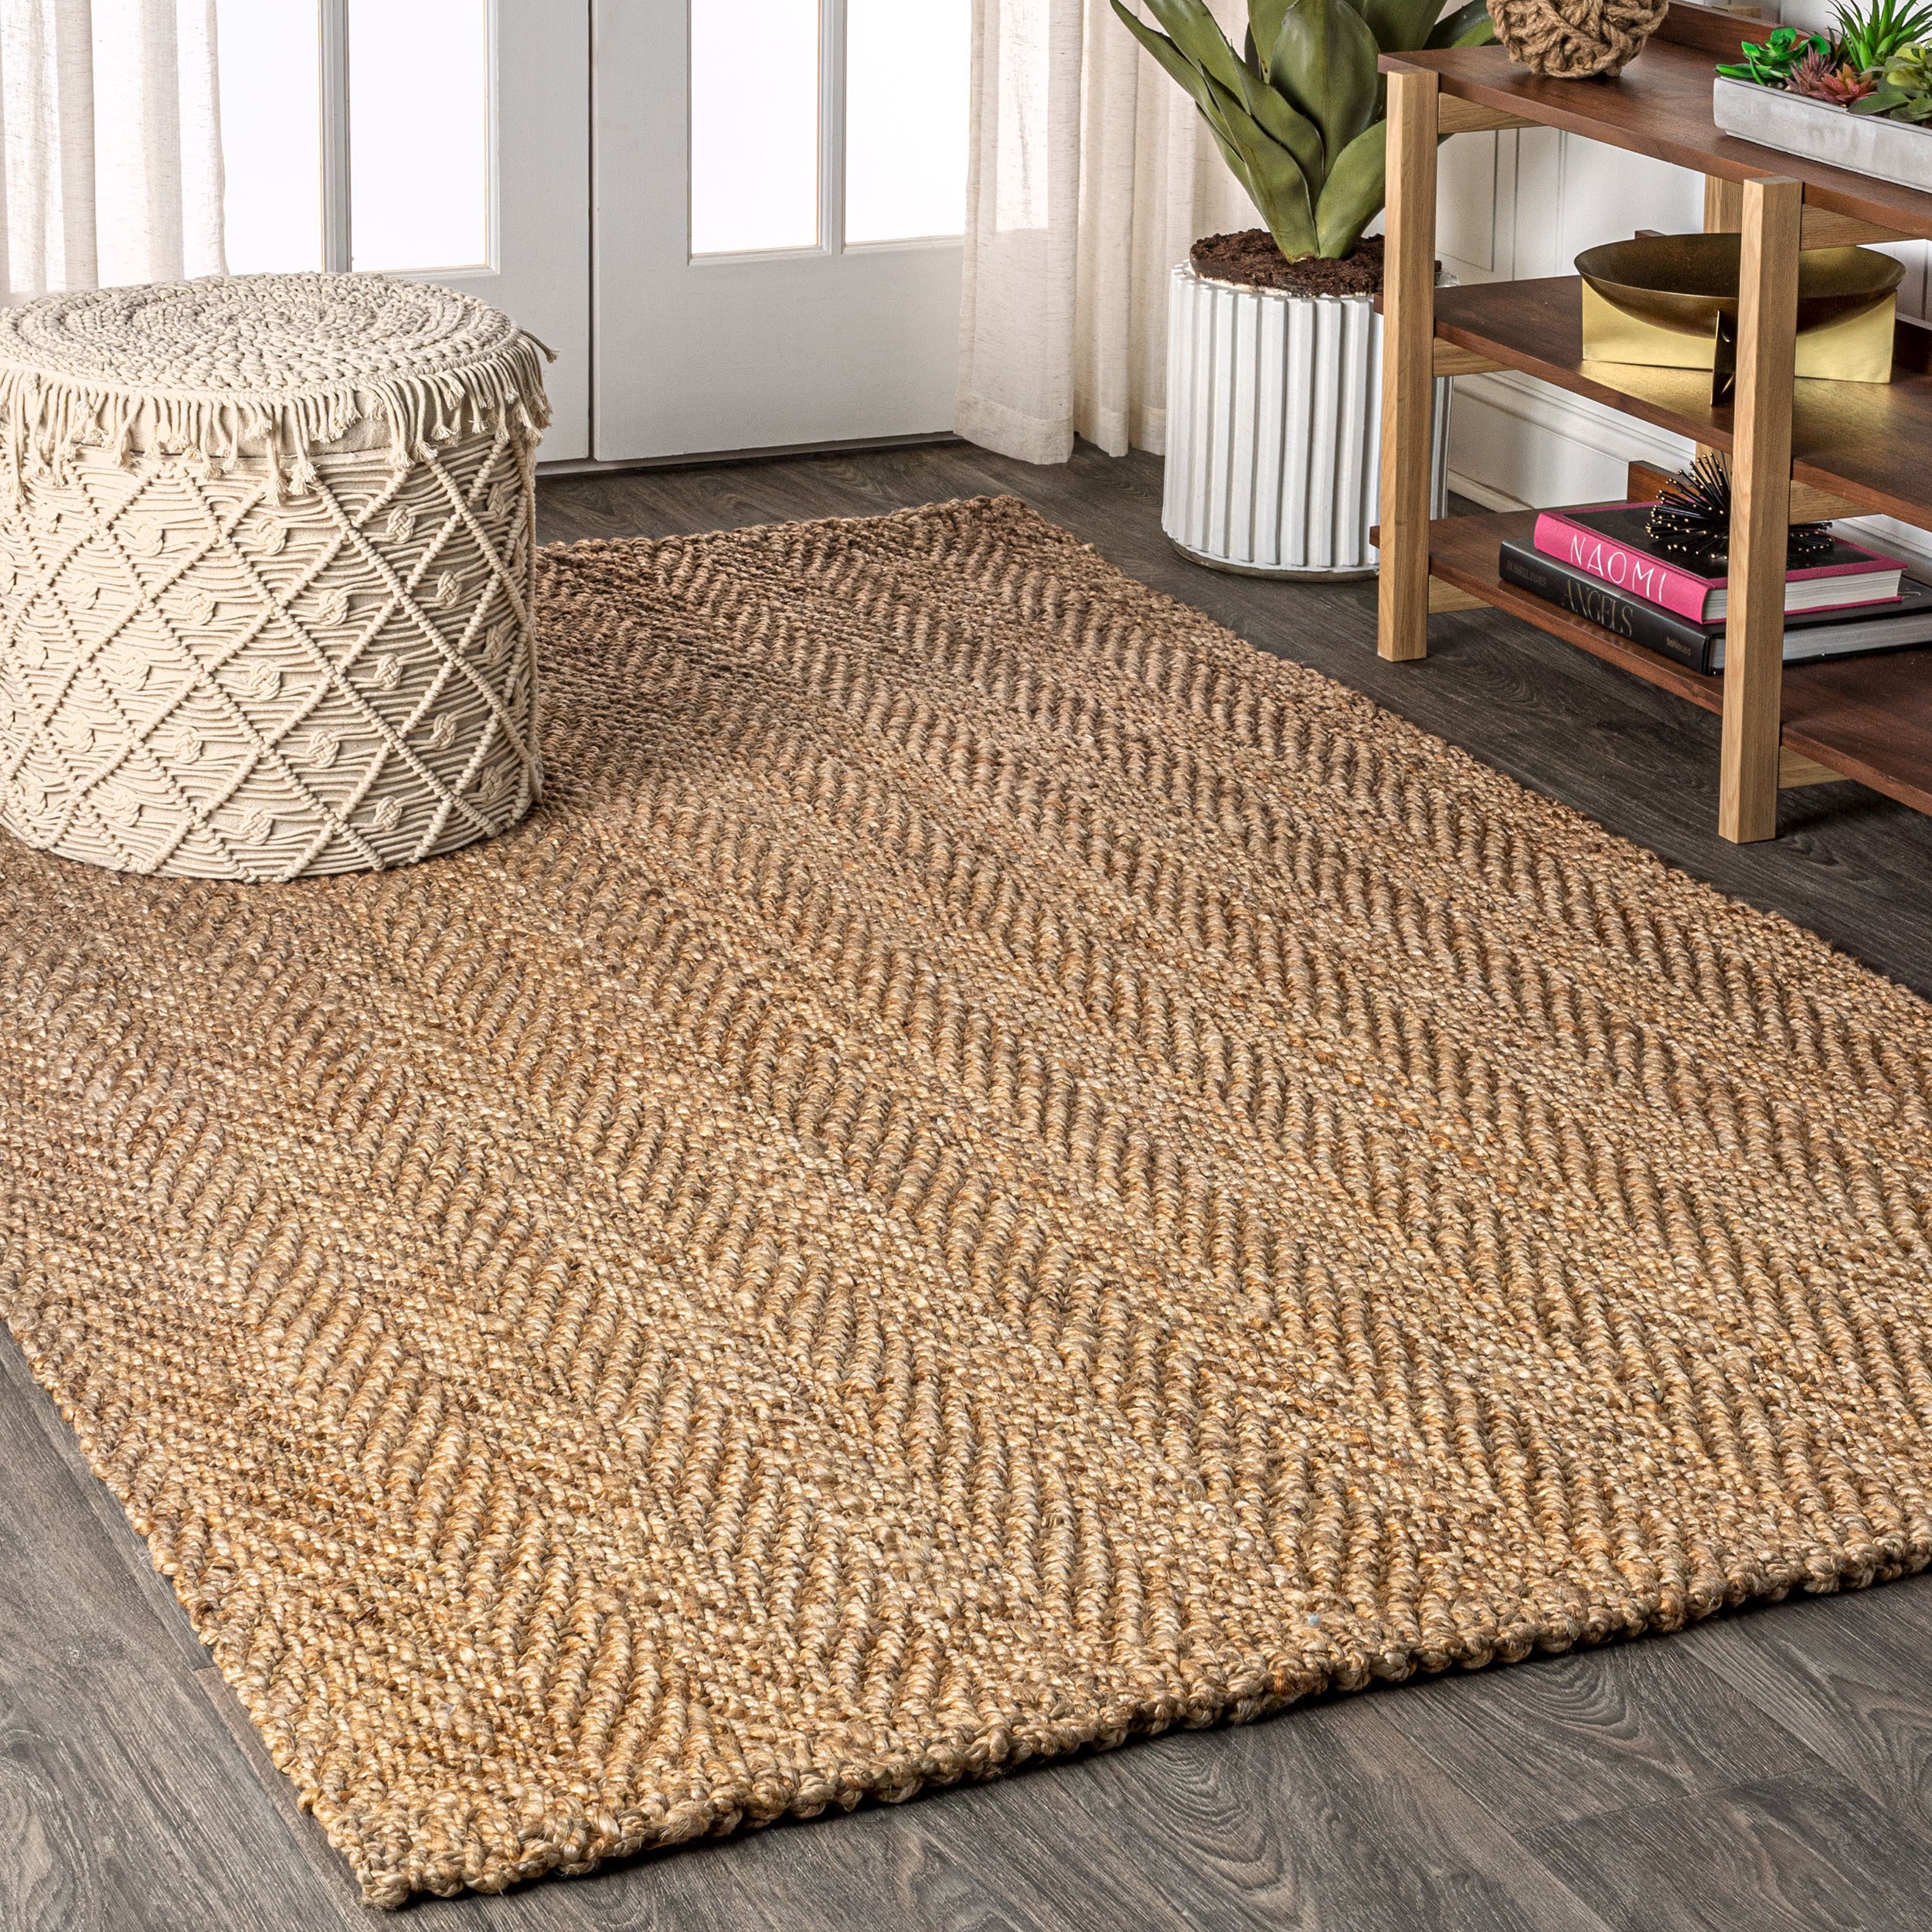 Organic Jute Oval Braided Rugs for Living Room FOR SALE, Bohemian Bedroom Area  Rug 3 X 5, Soft Reversible Indoor Outdoor Area Rugs 4 X 6 